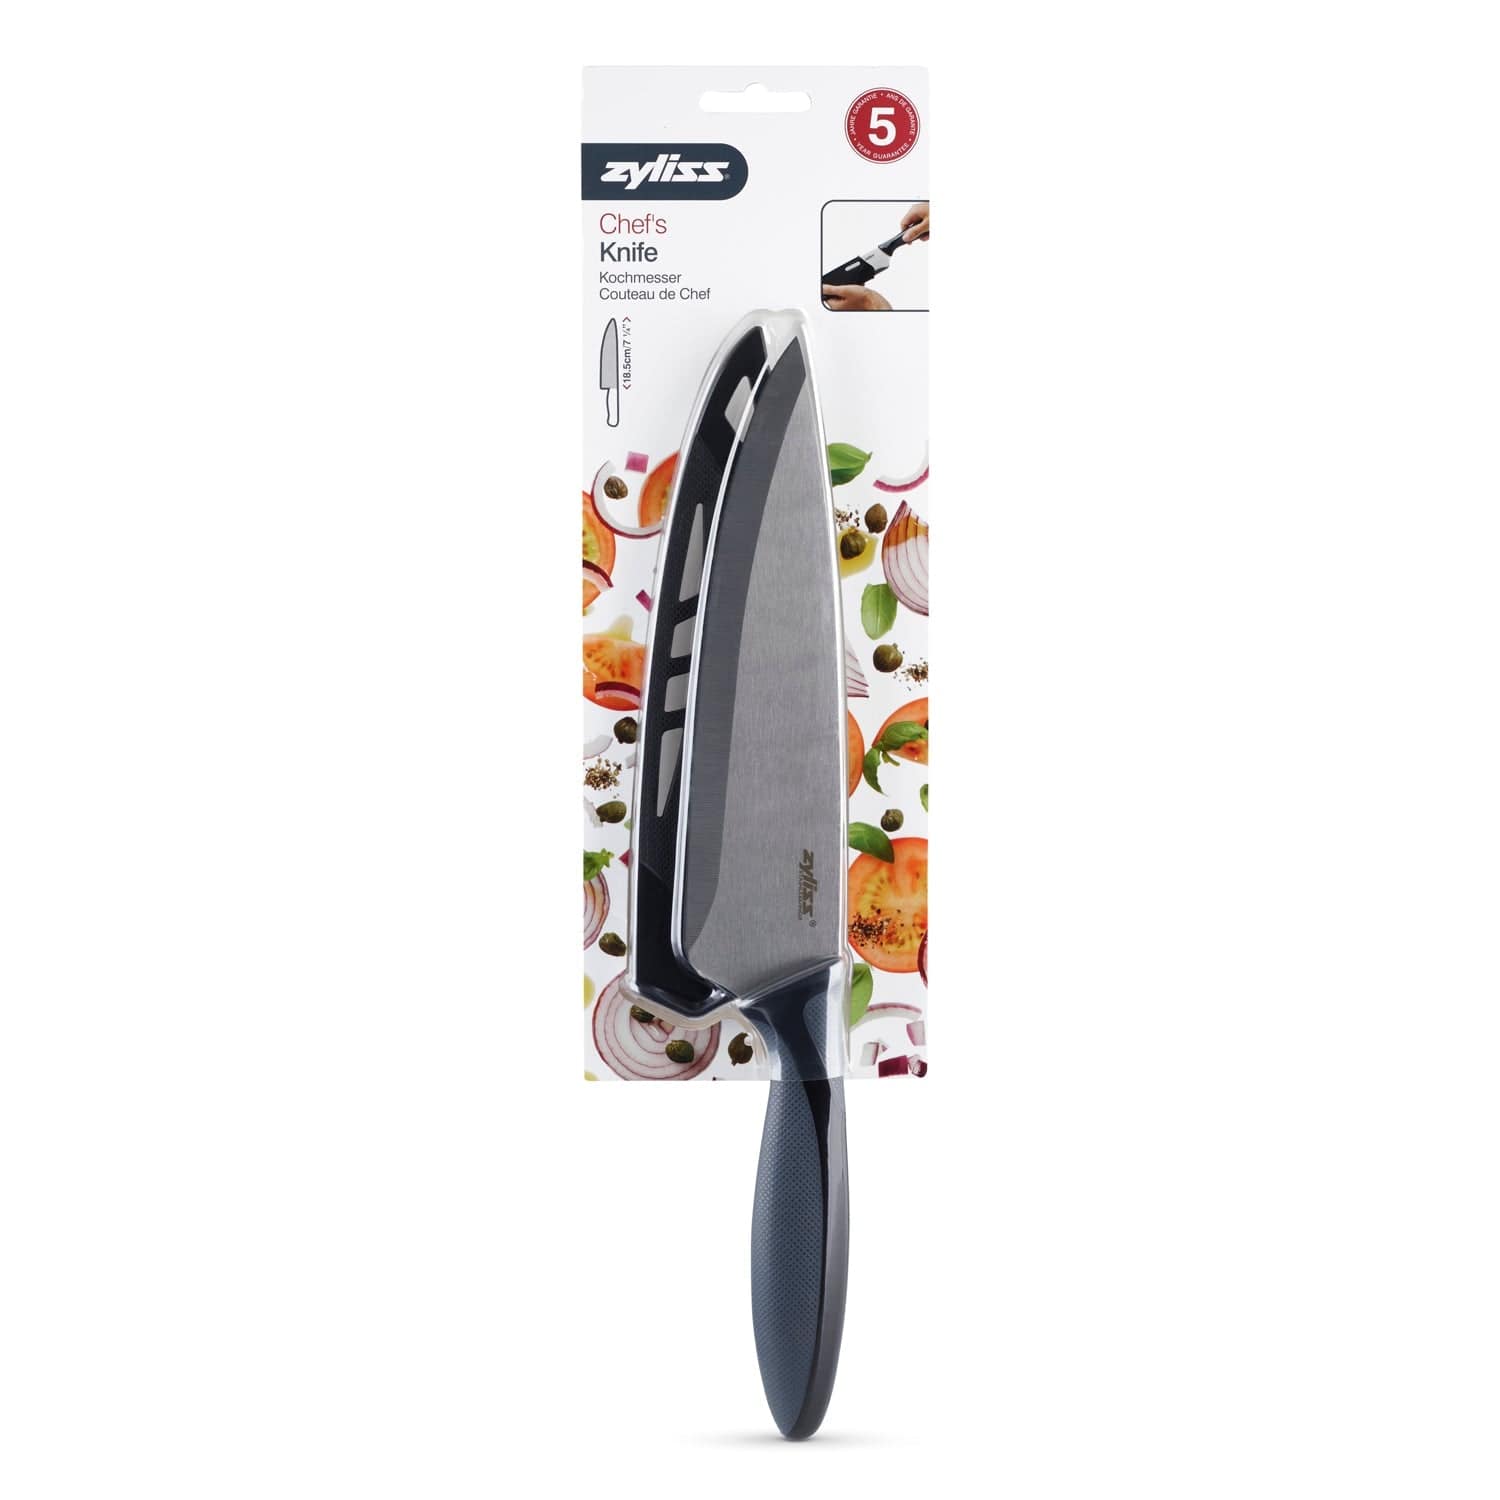 Chef's Knife with Sheath Cover, 7.5 inch